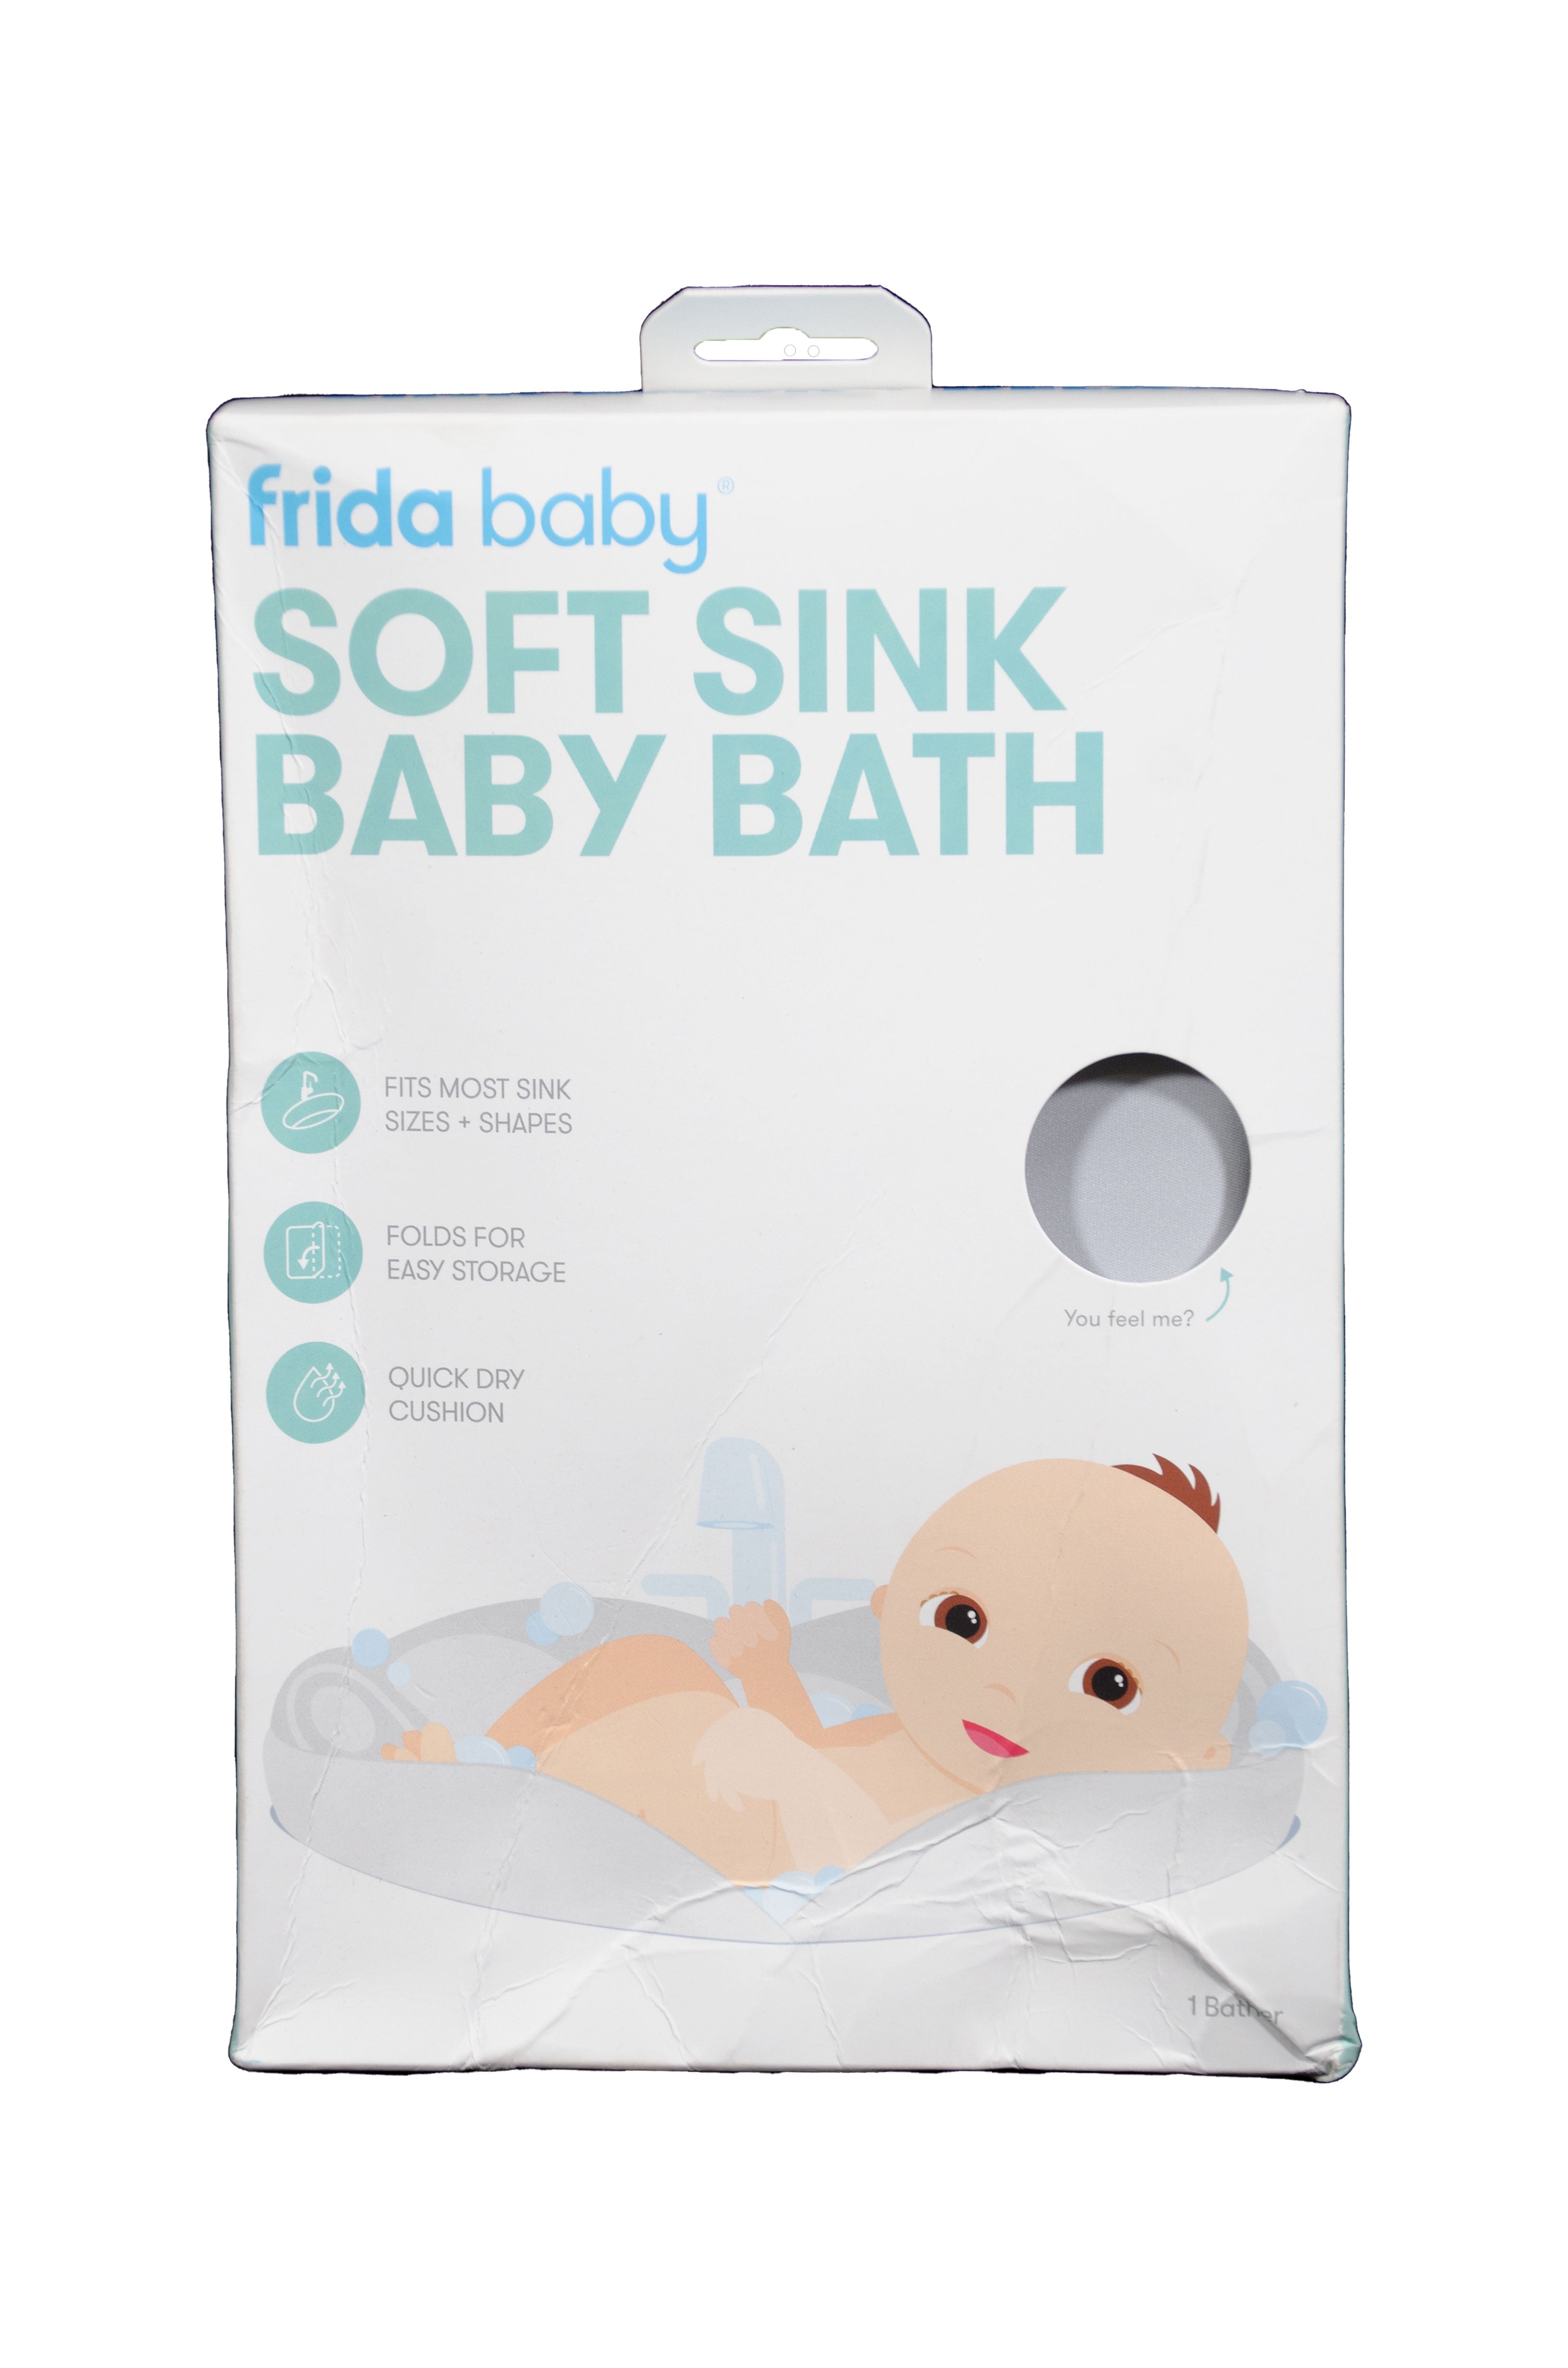  Frida Baby Soft Sink Baby Bath and Control The Flow